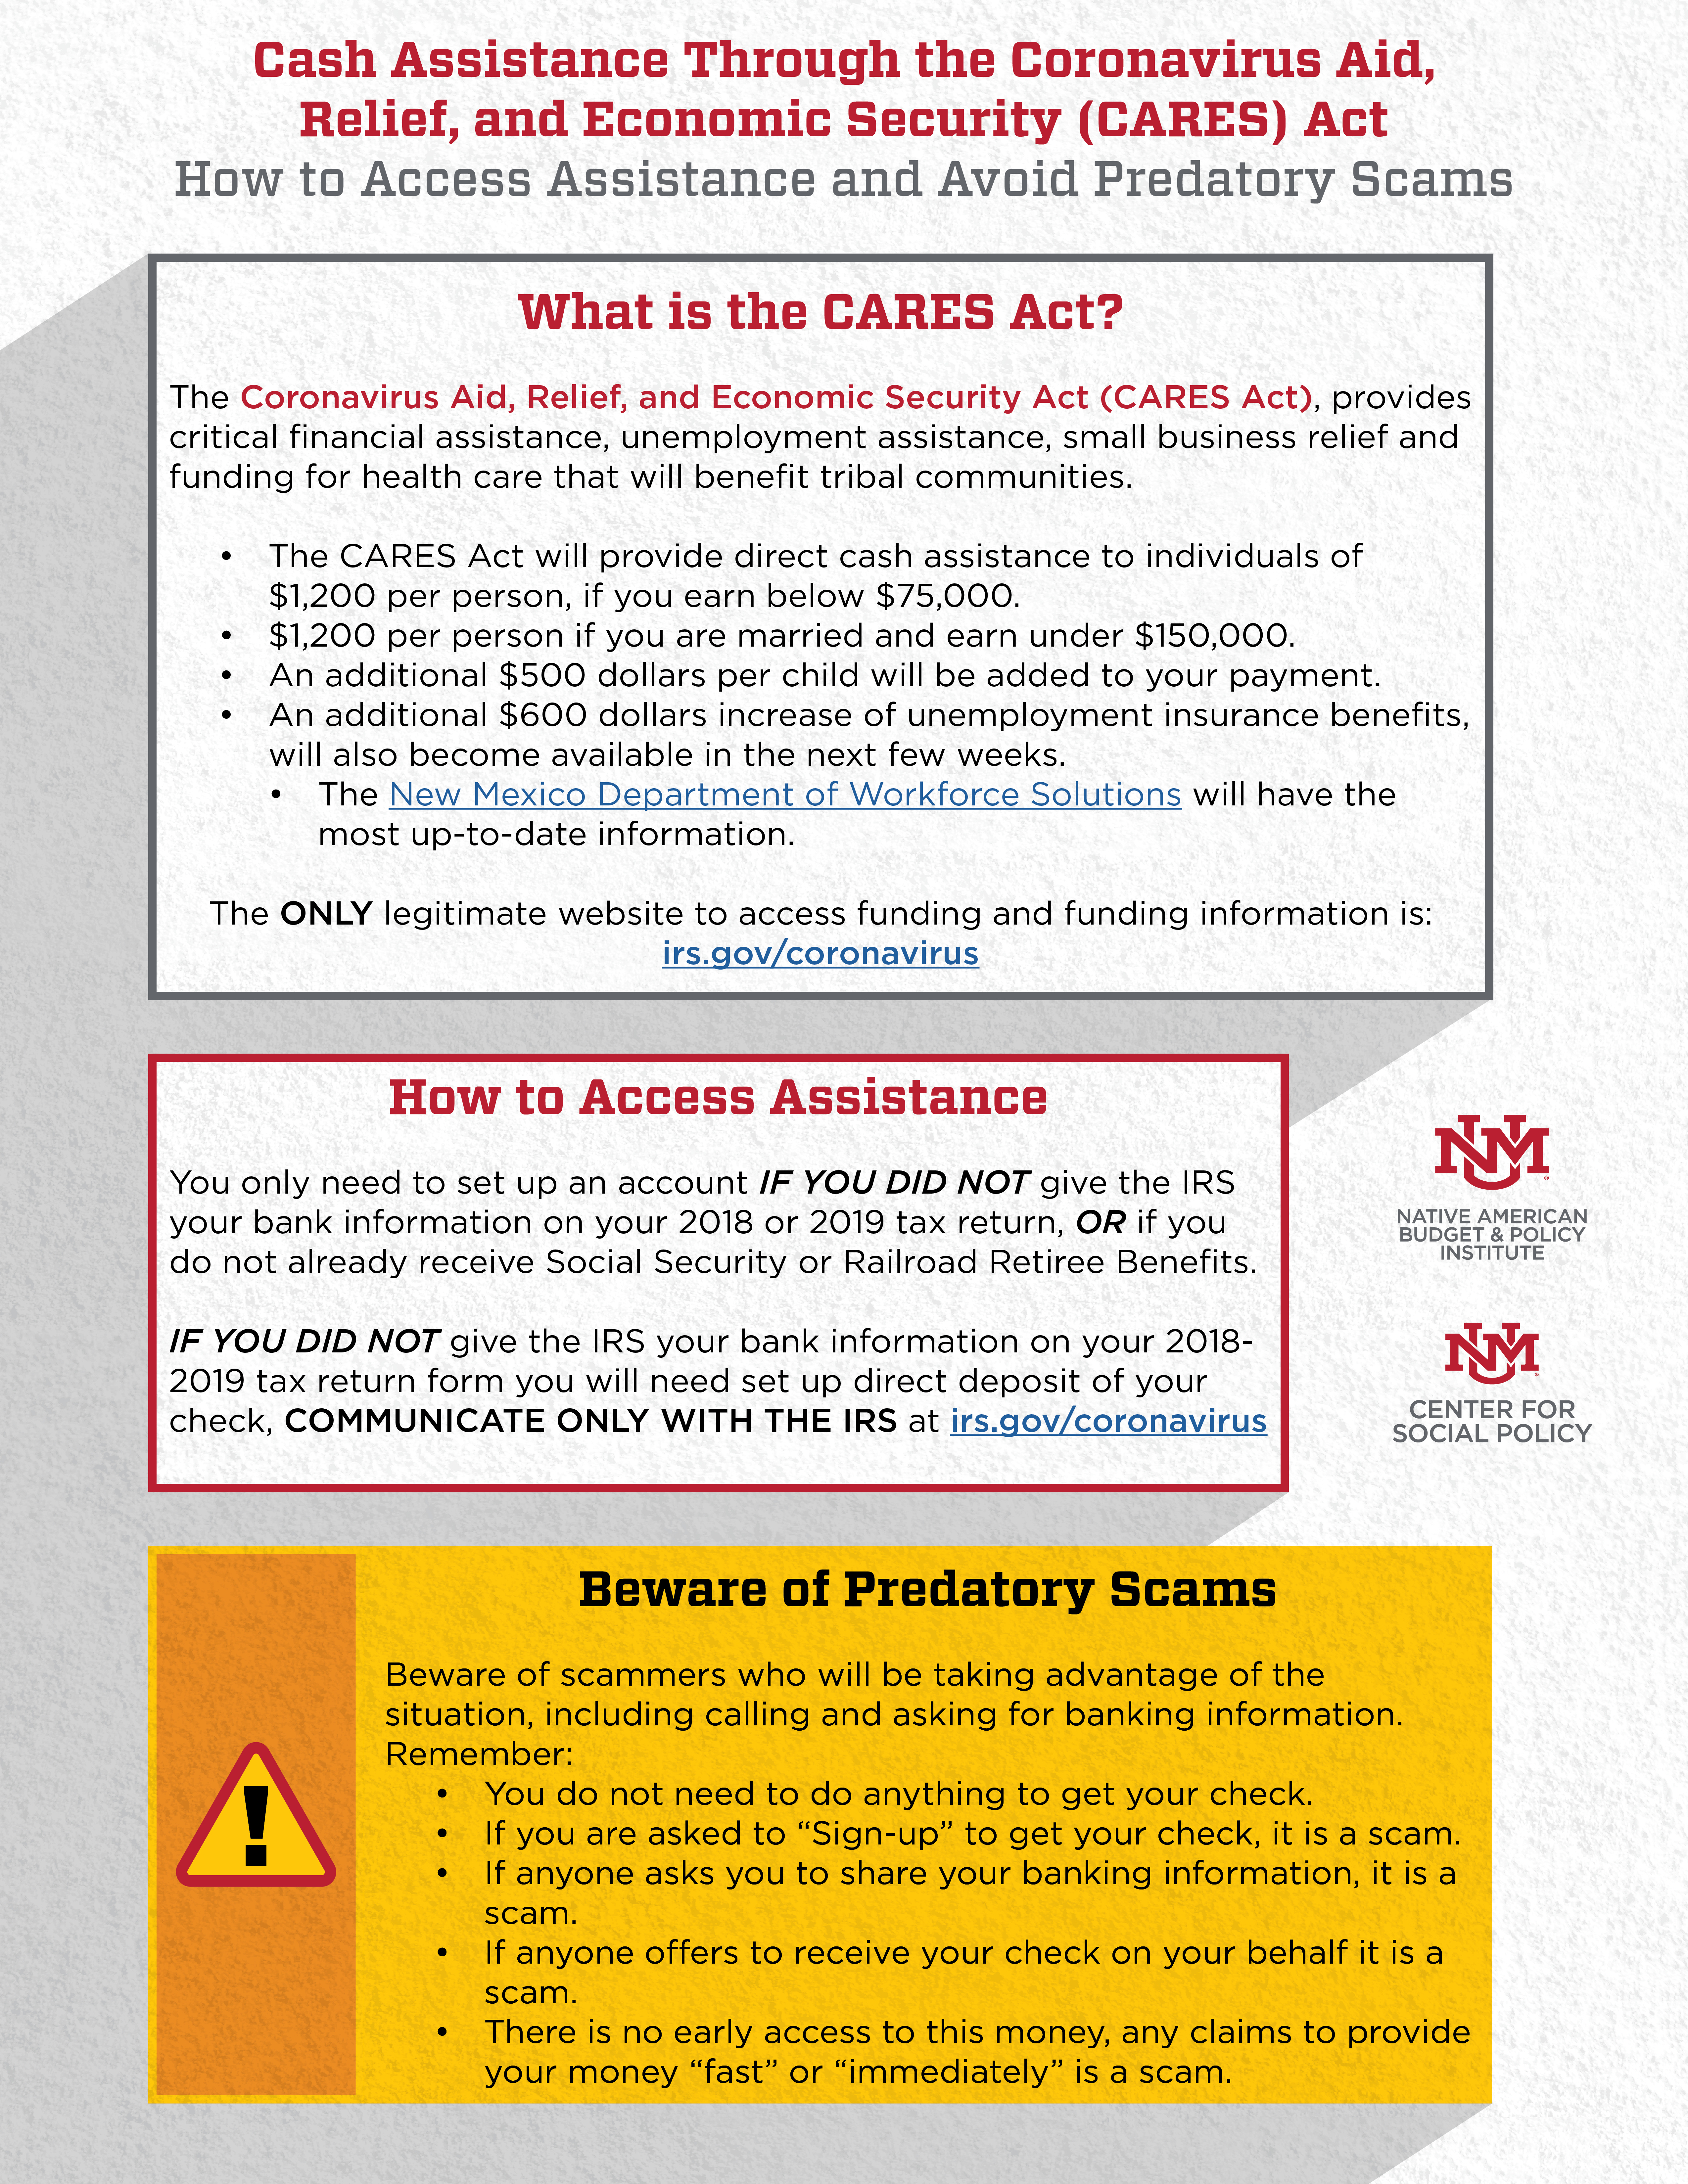 cares-act-access-and-scam-info.jpg